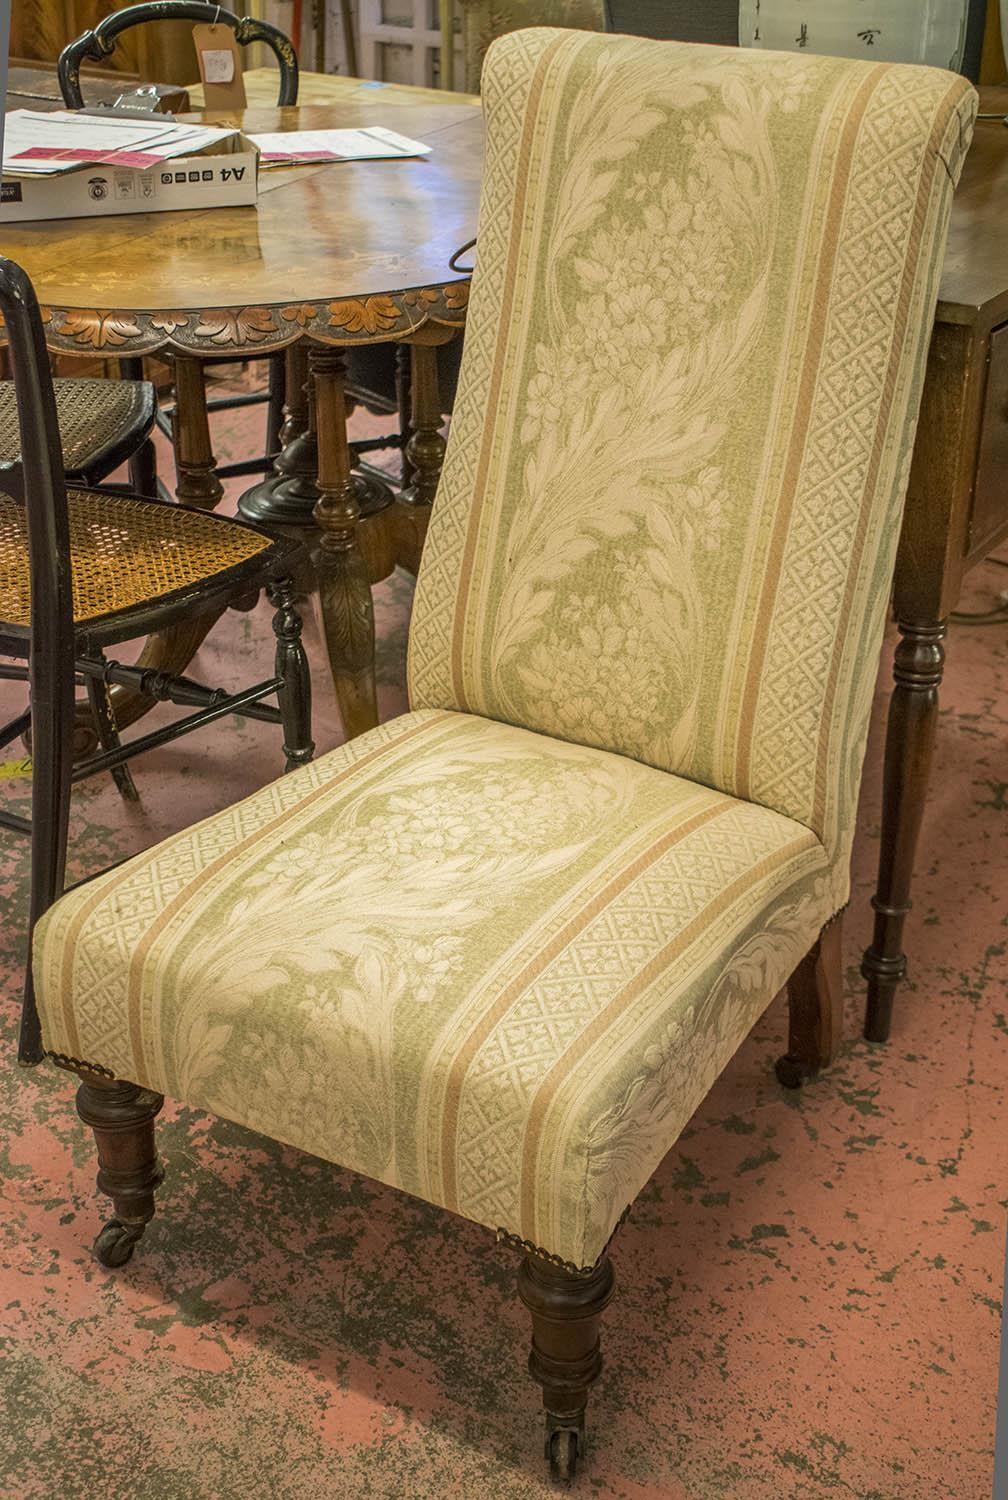 NURSING CHAIR, Victorian oak in pale floral and striped fabric, 95cm H x 52cm.